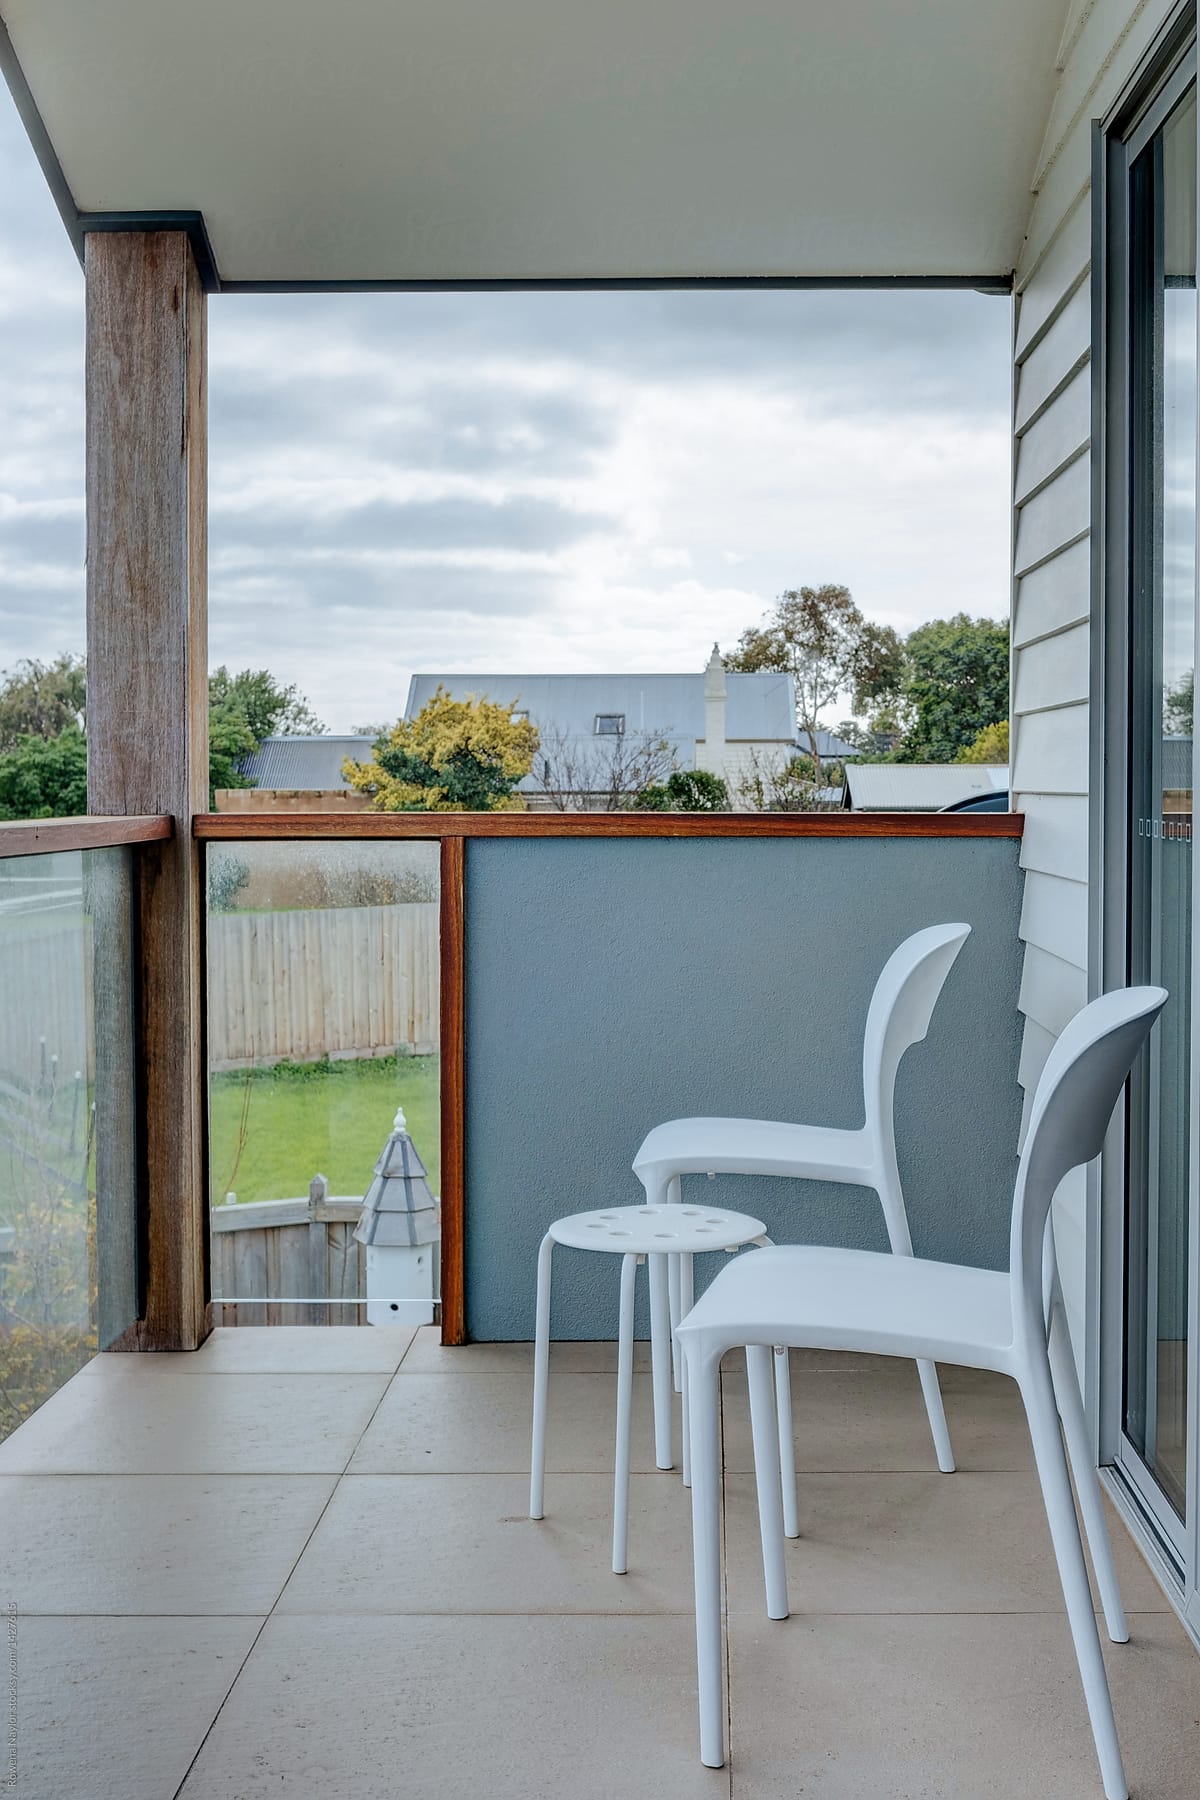 Elevated first floor balcony with modern resin chairs